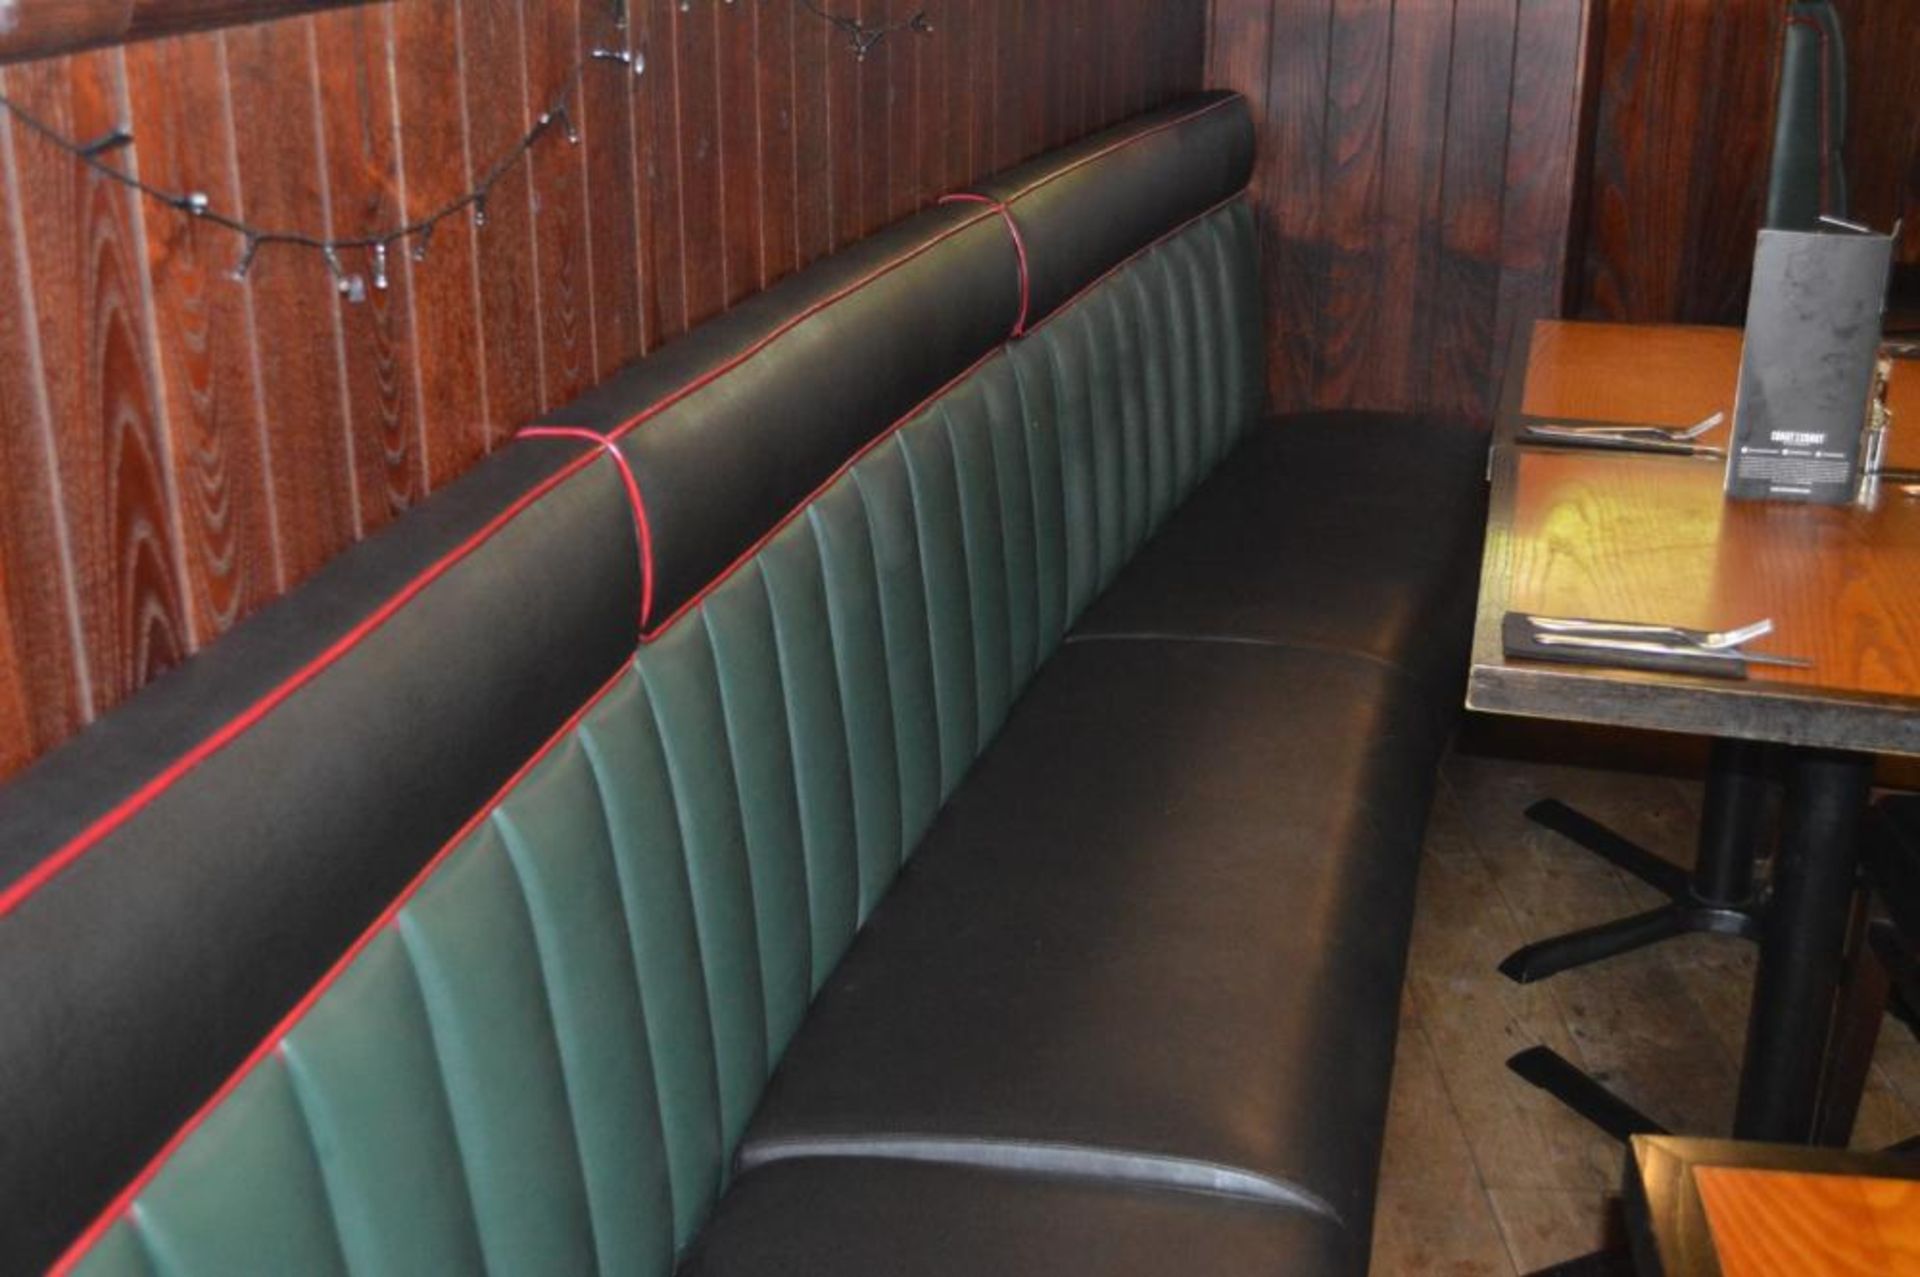 1 x Long Banquet Seating Bench - Features a Leather Upholstery With Green Backrests, Black Seat - Image 4 of 5